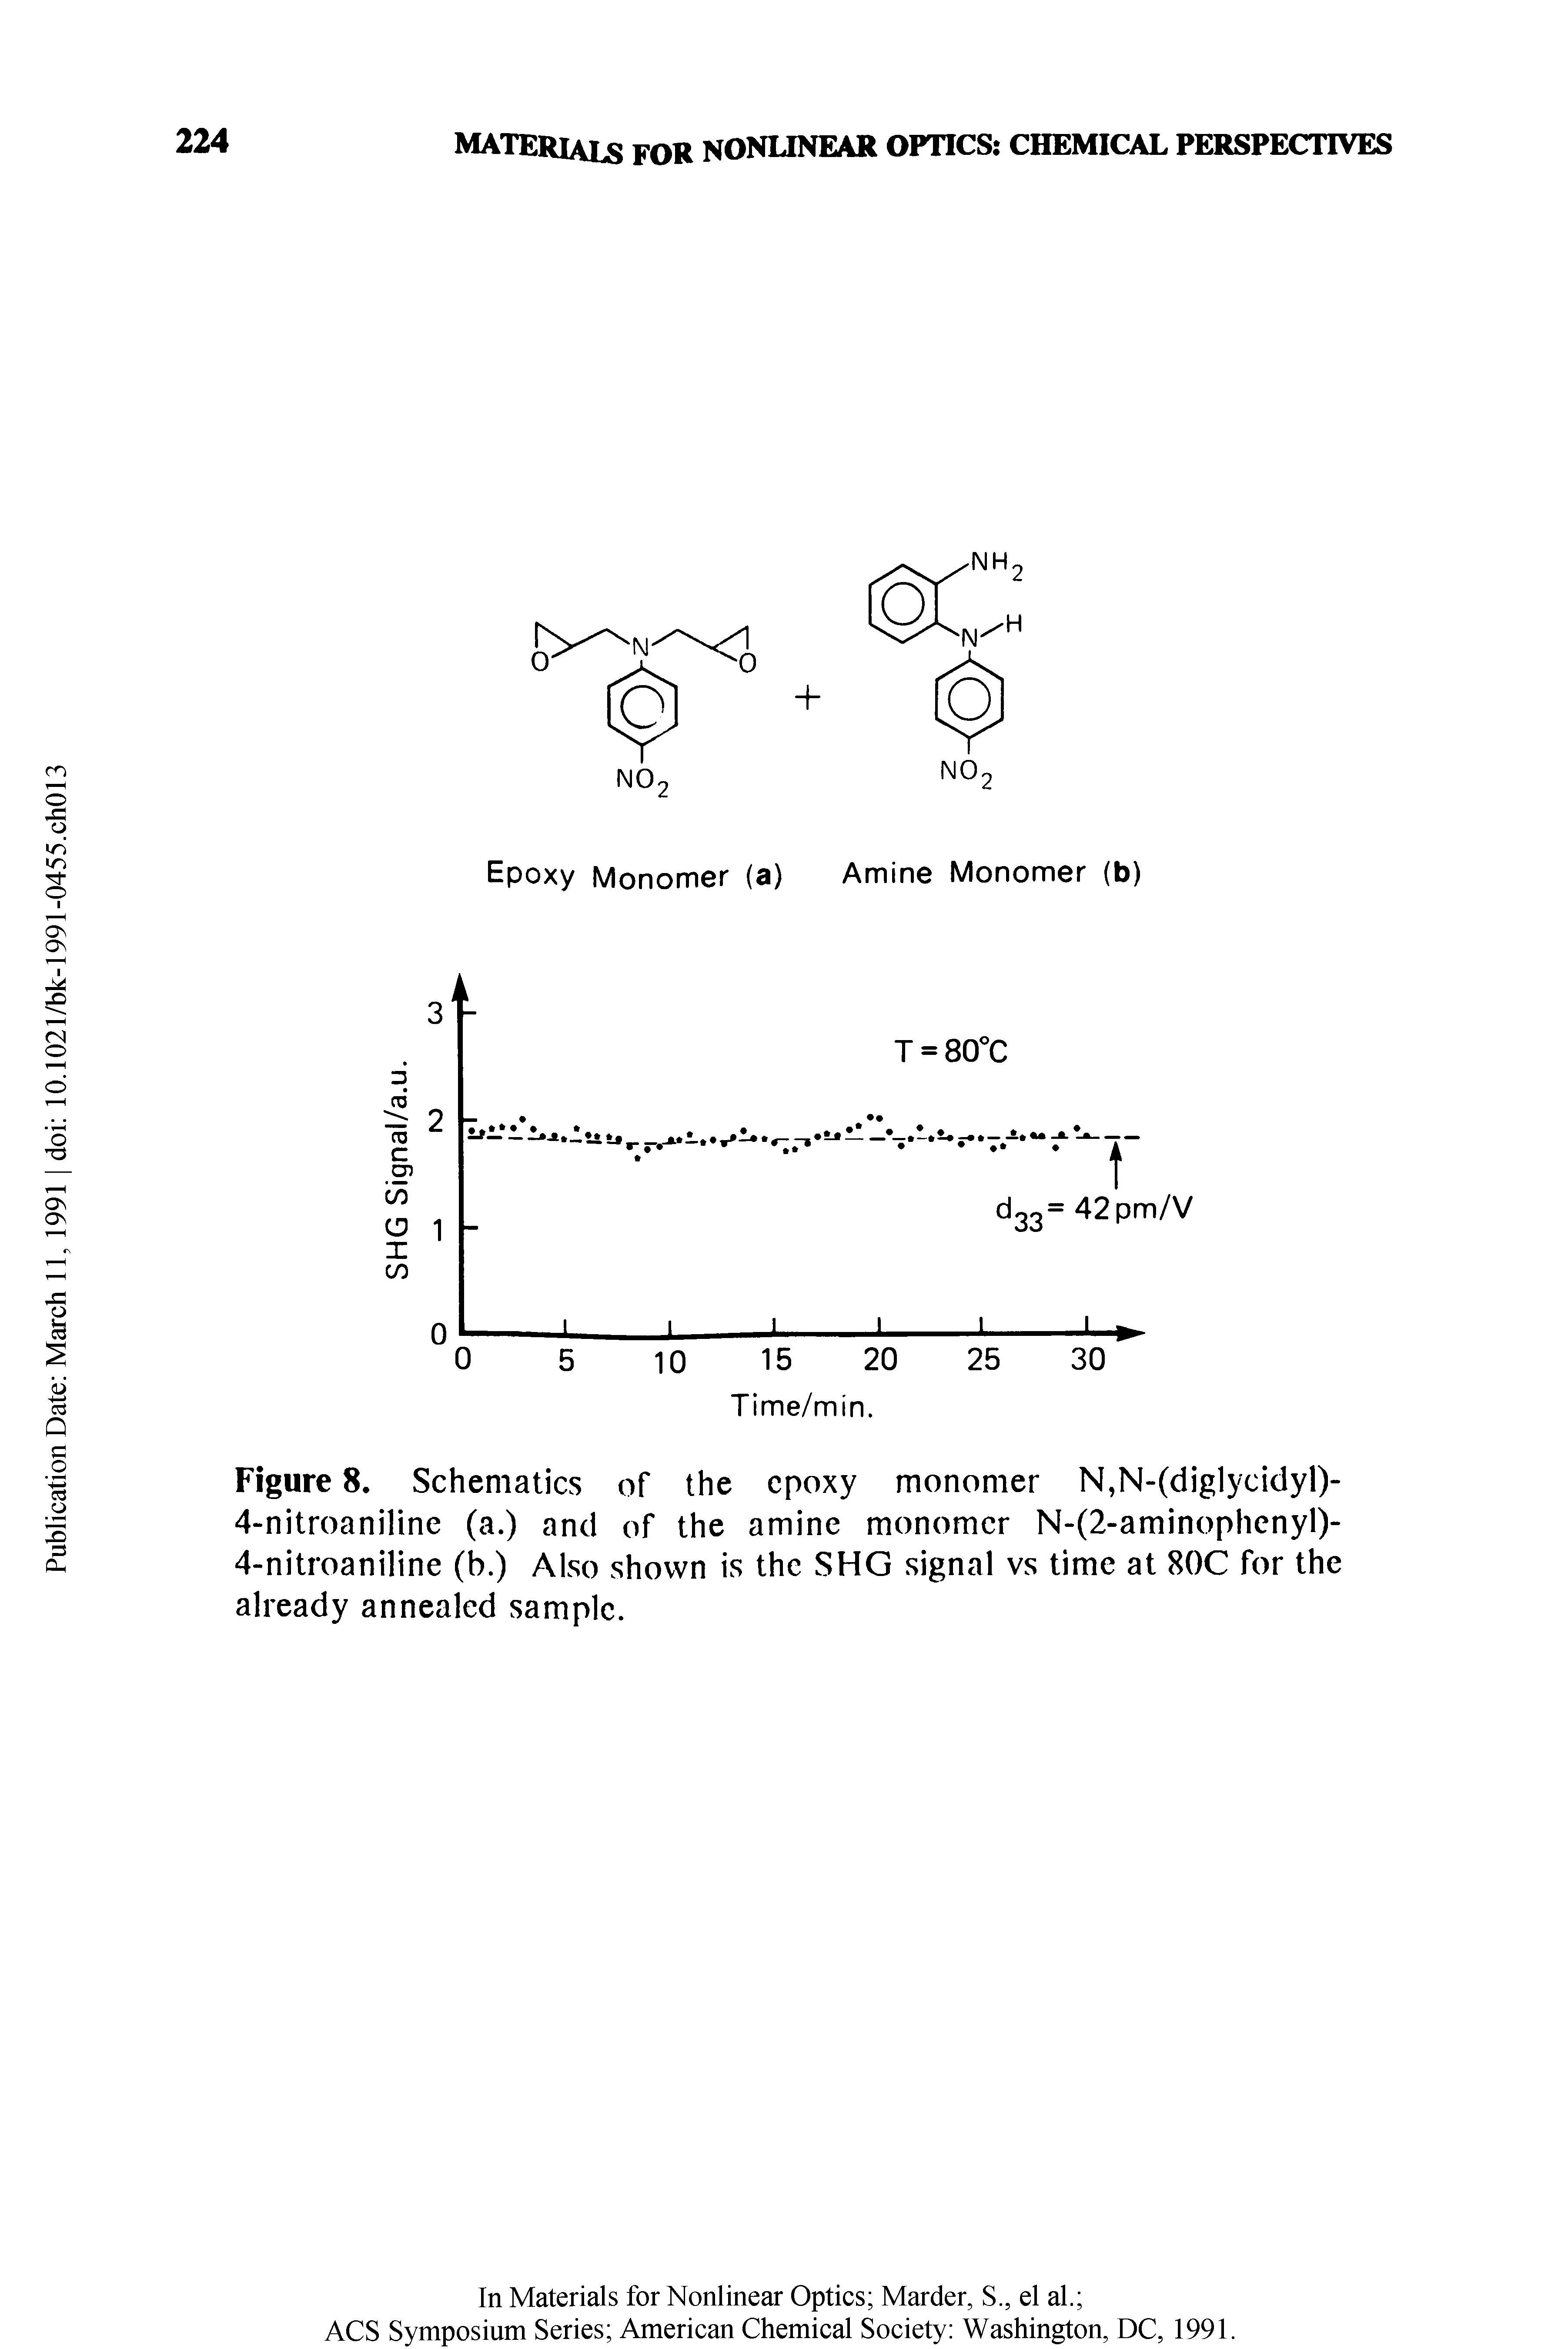 Figure 8. Schematics of the epoxy monomer N,N-(diglycidyl)-4-nitroaniline (a.) and of the amine monomer N-(2-aminophenyl)-4-nitroaniline (b.) Also shown is the SHG signal vs time at 80C for the already annealed sample.